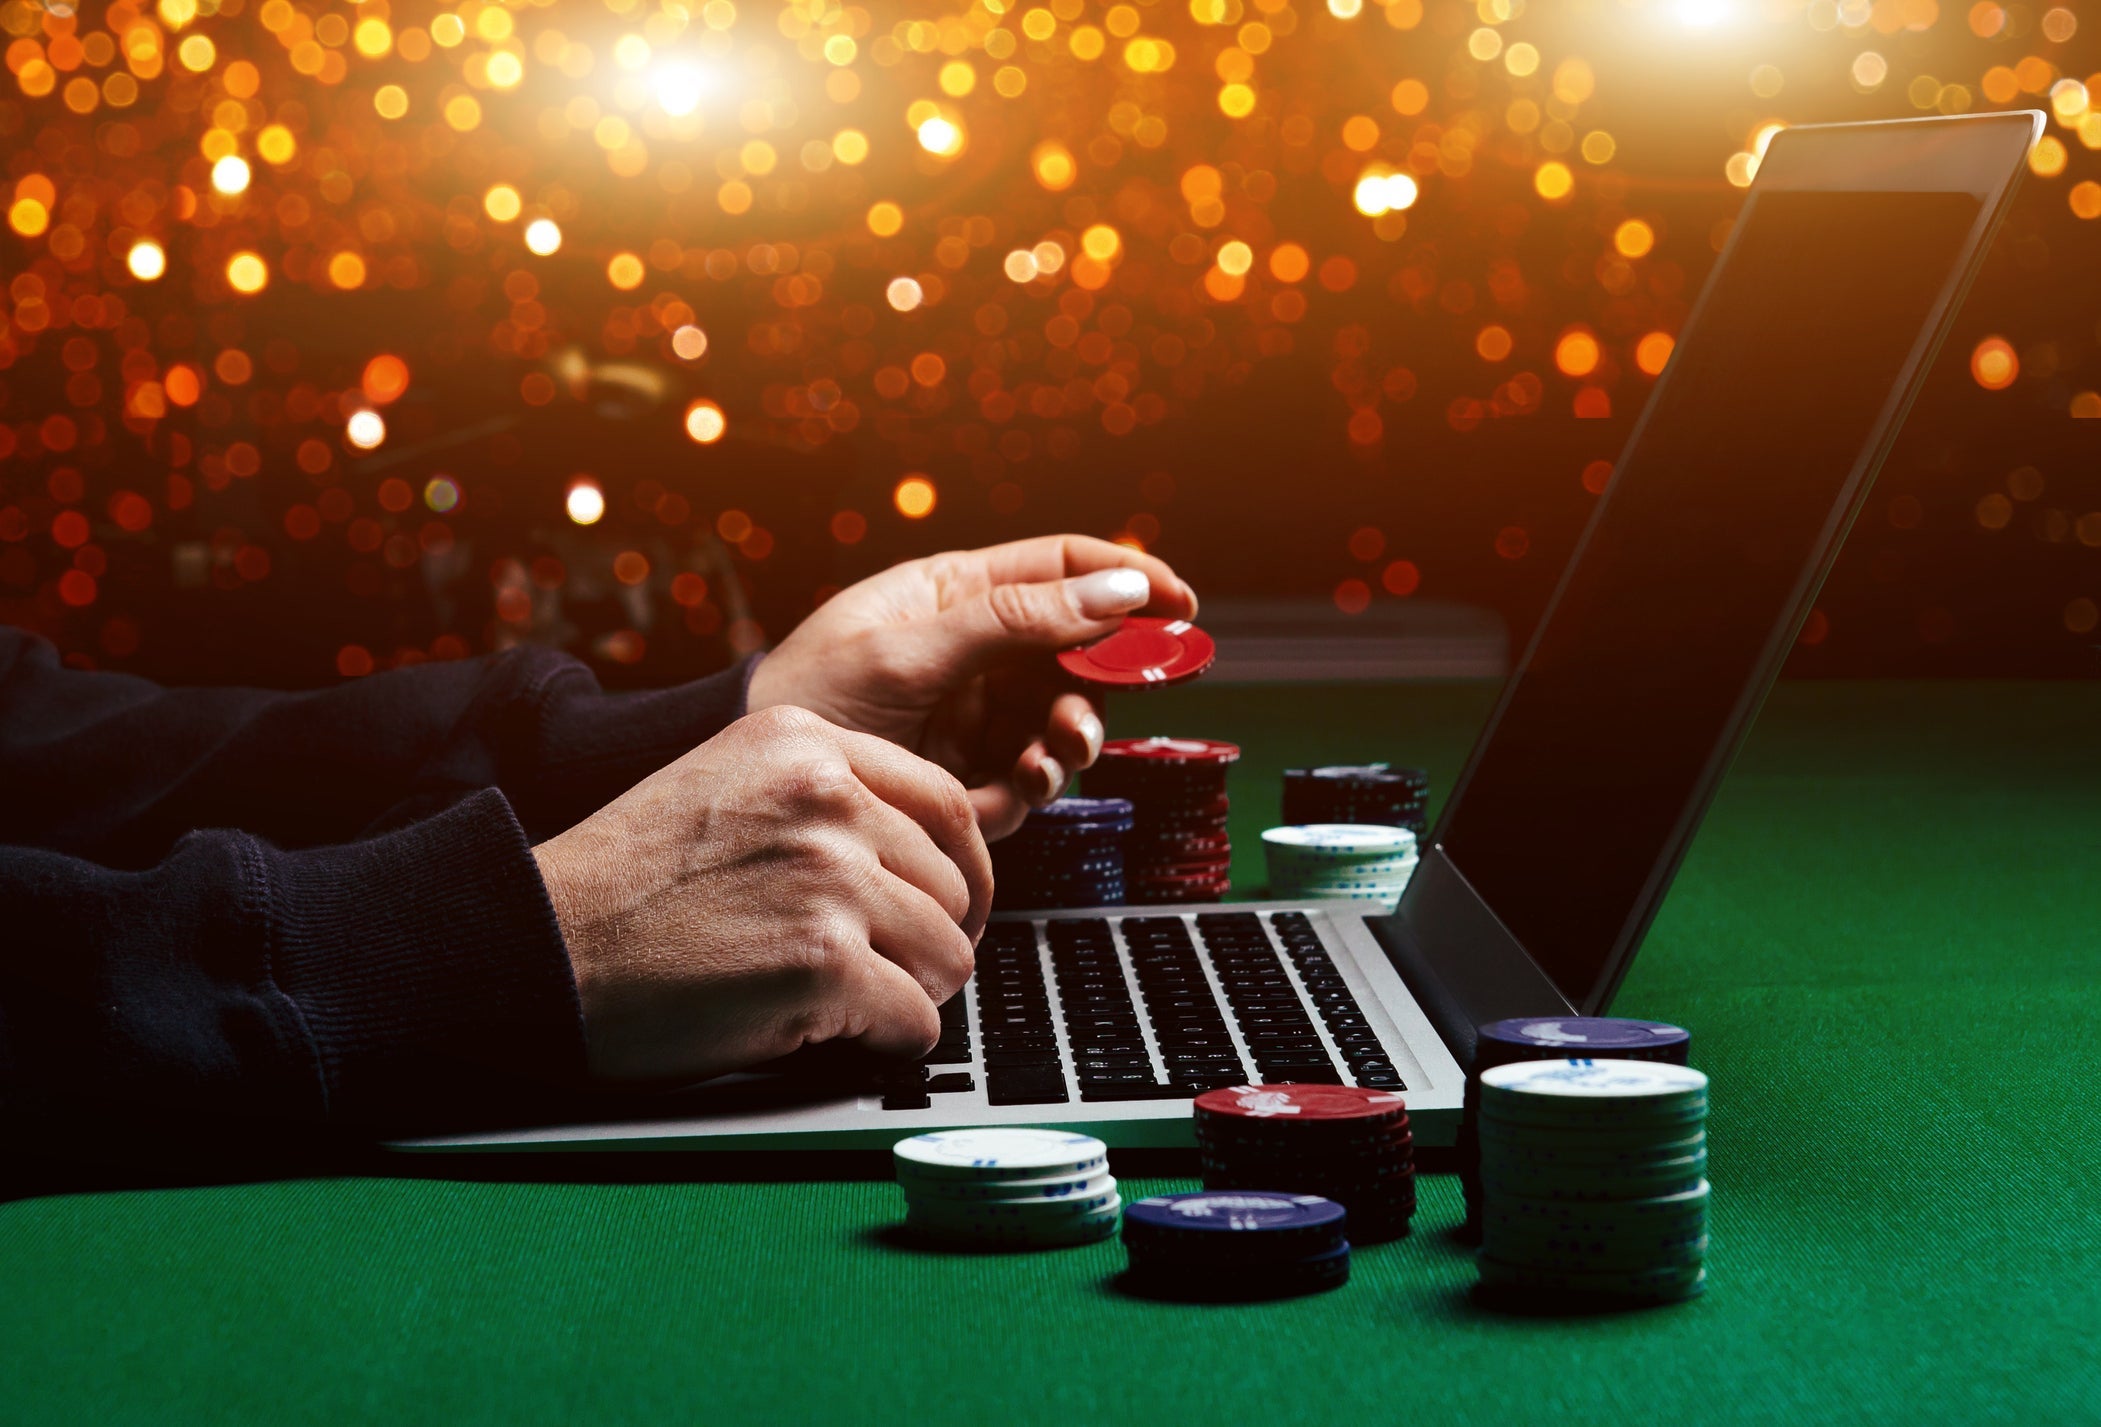 Online gaming is fun, even more, when you are on a winning streak. How can you gamble safely online?